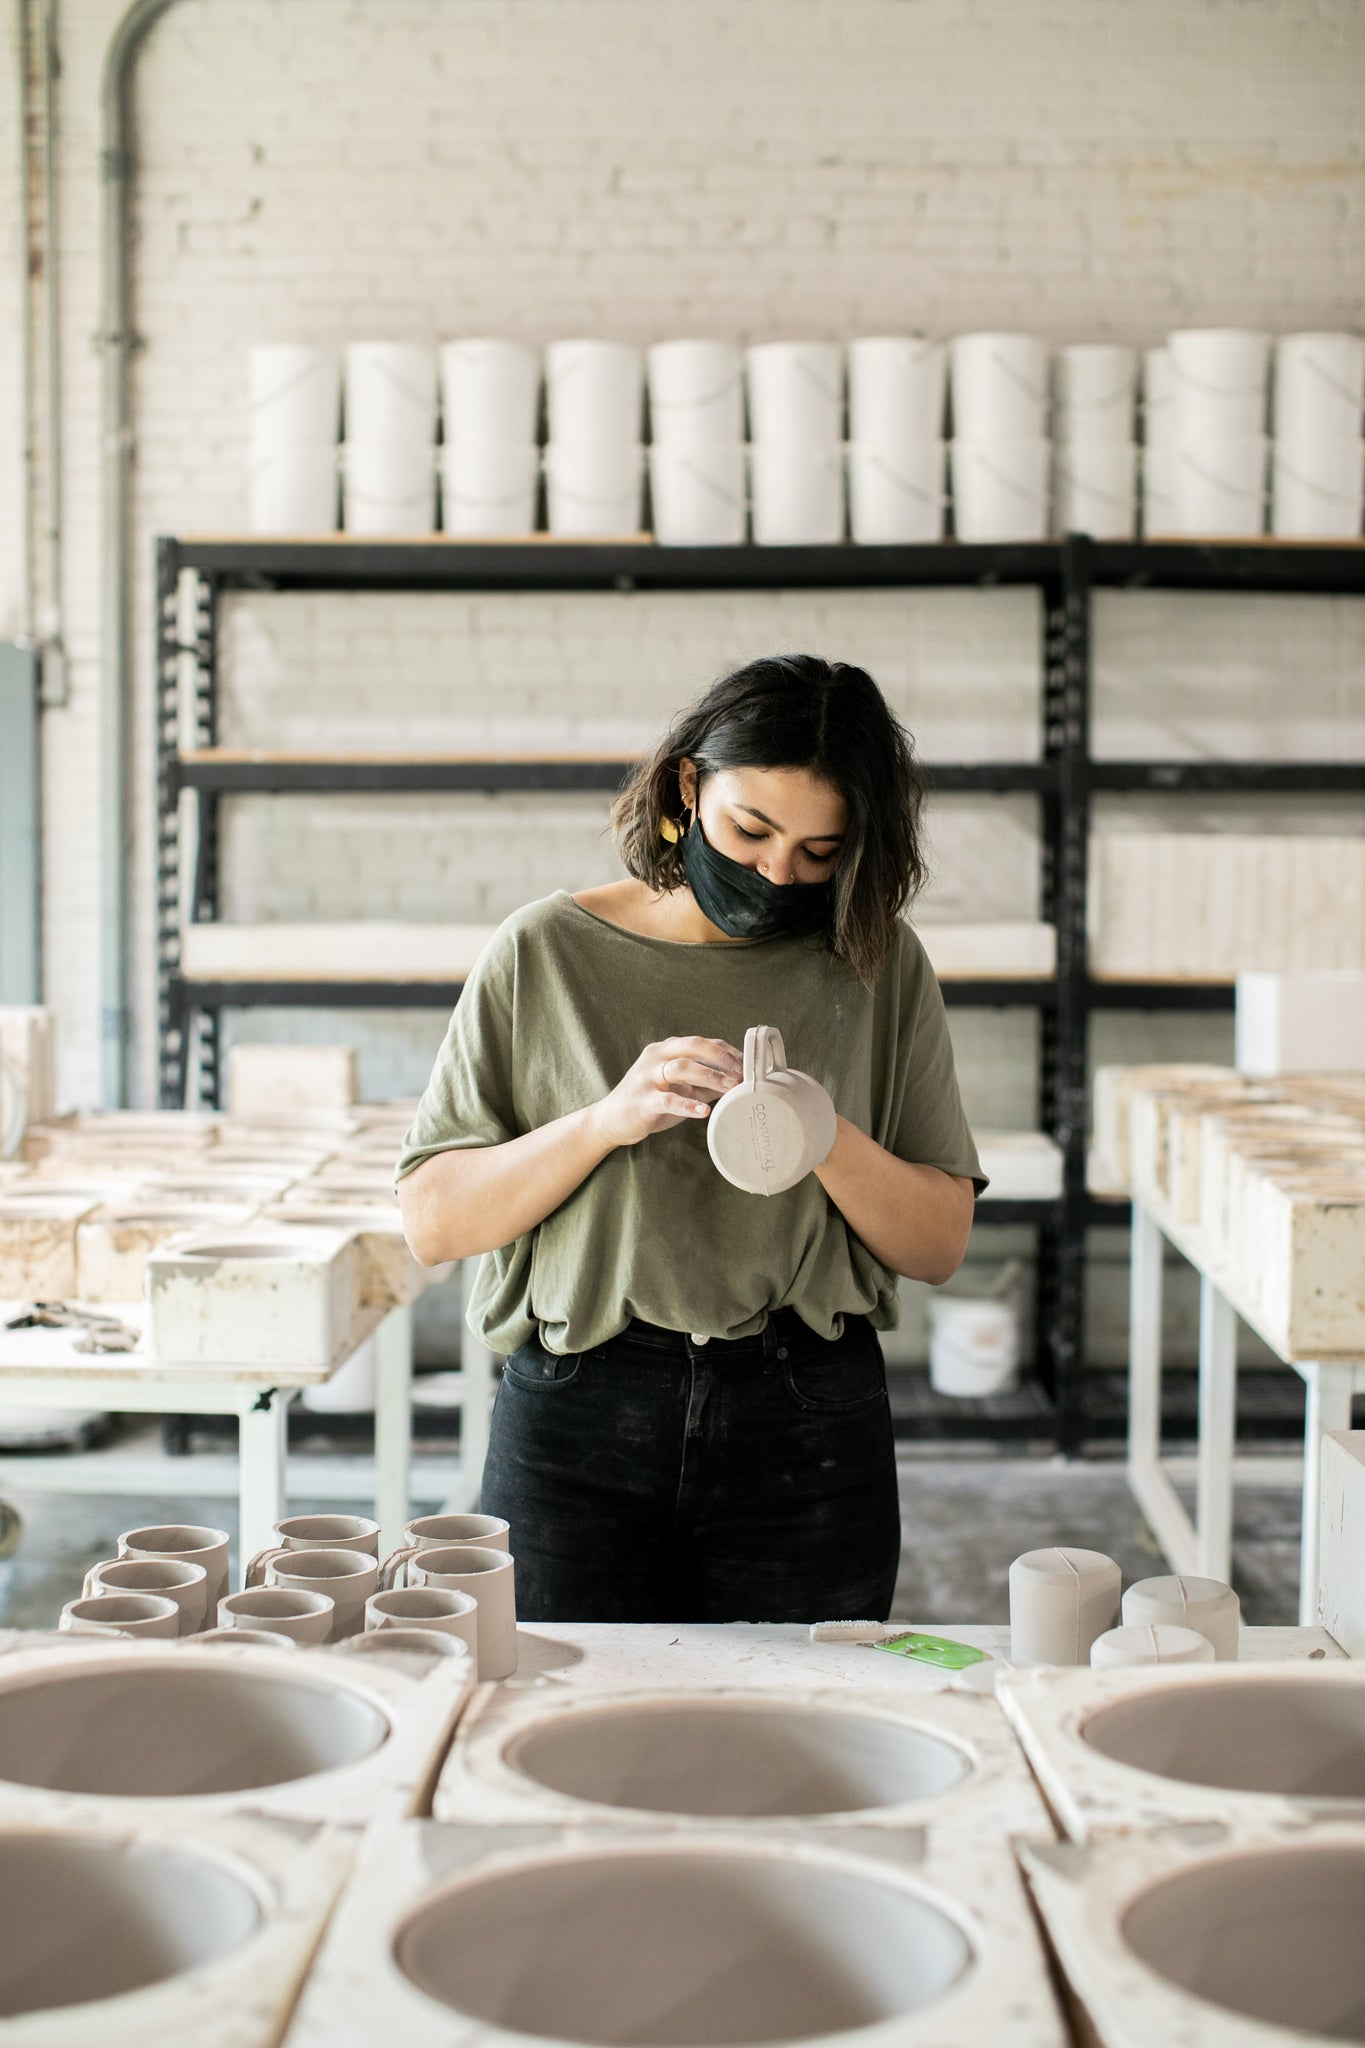 Pottery Store, Handmade to Order